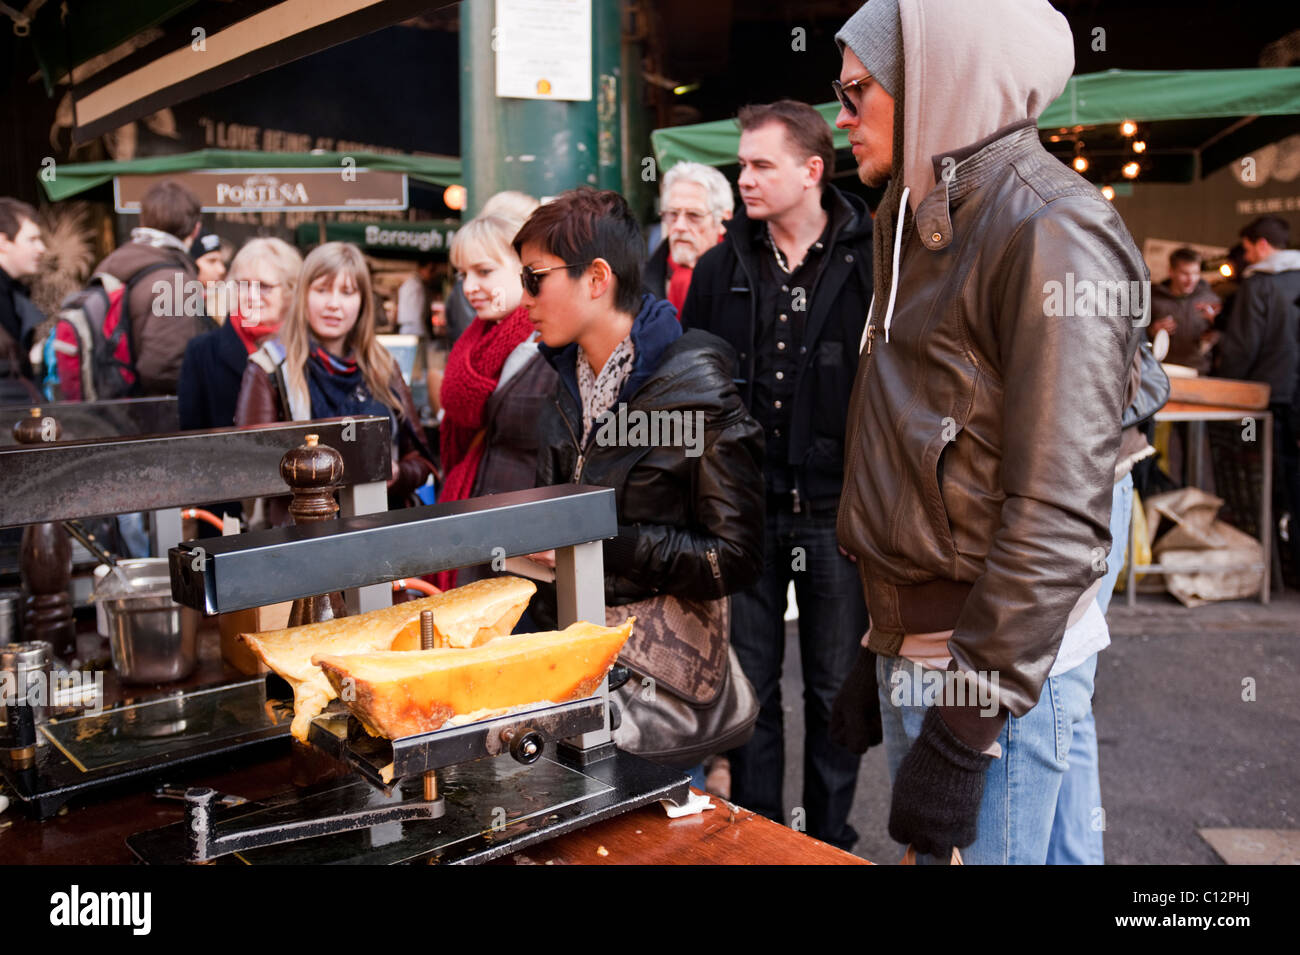 Raclette cheese grilling - and a queue of customers - at a popular food stall at London's Borough Market. Stock Photo